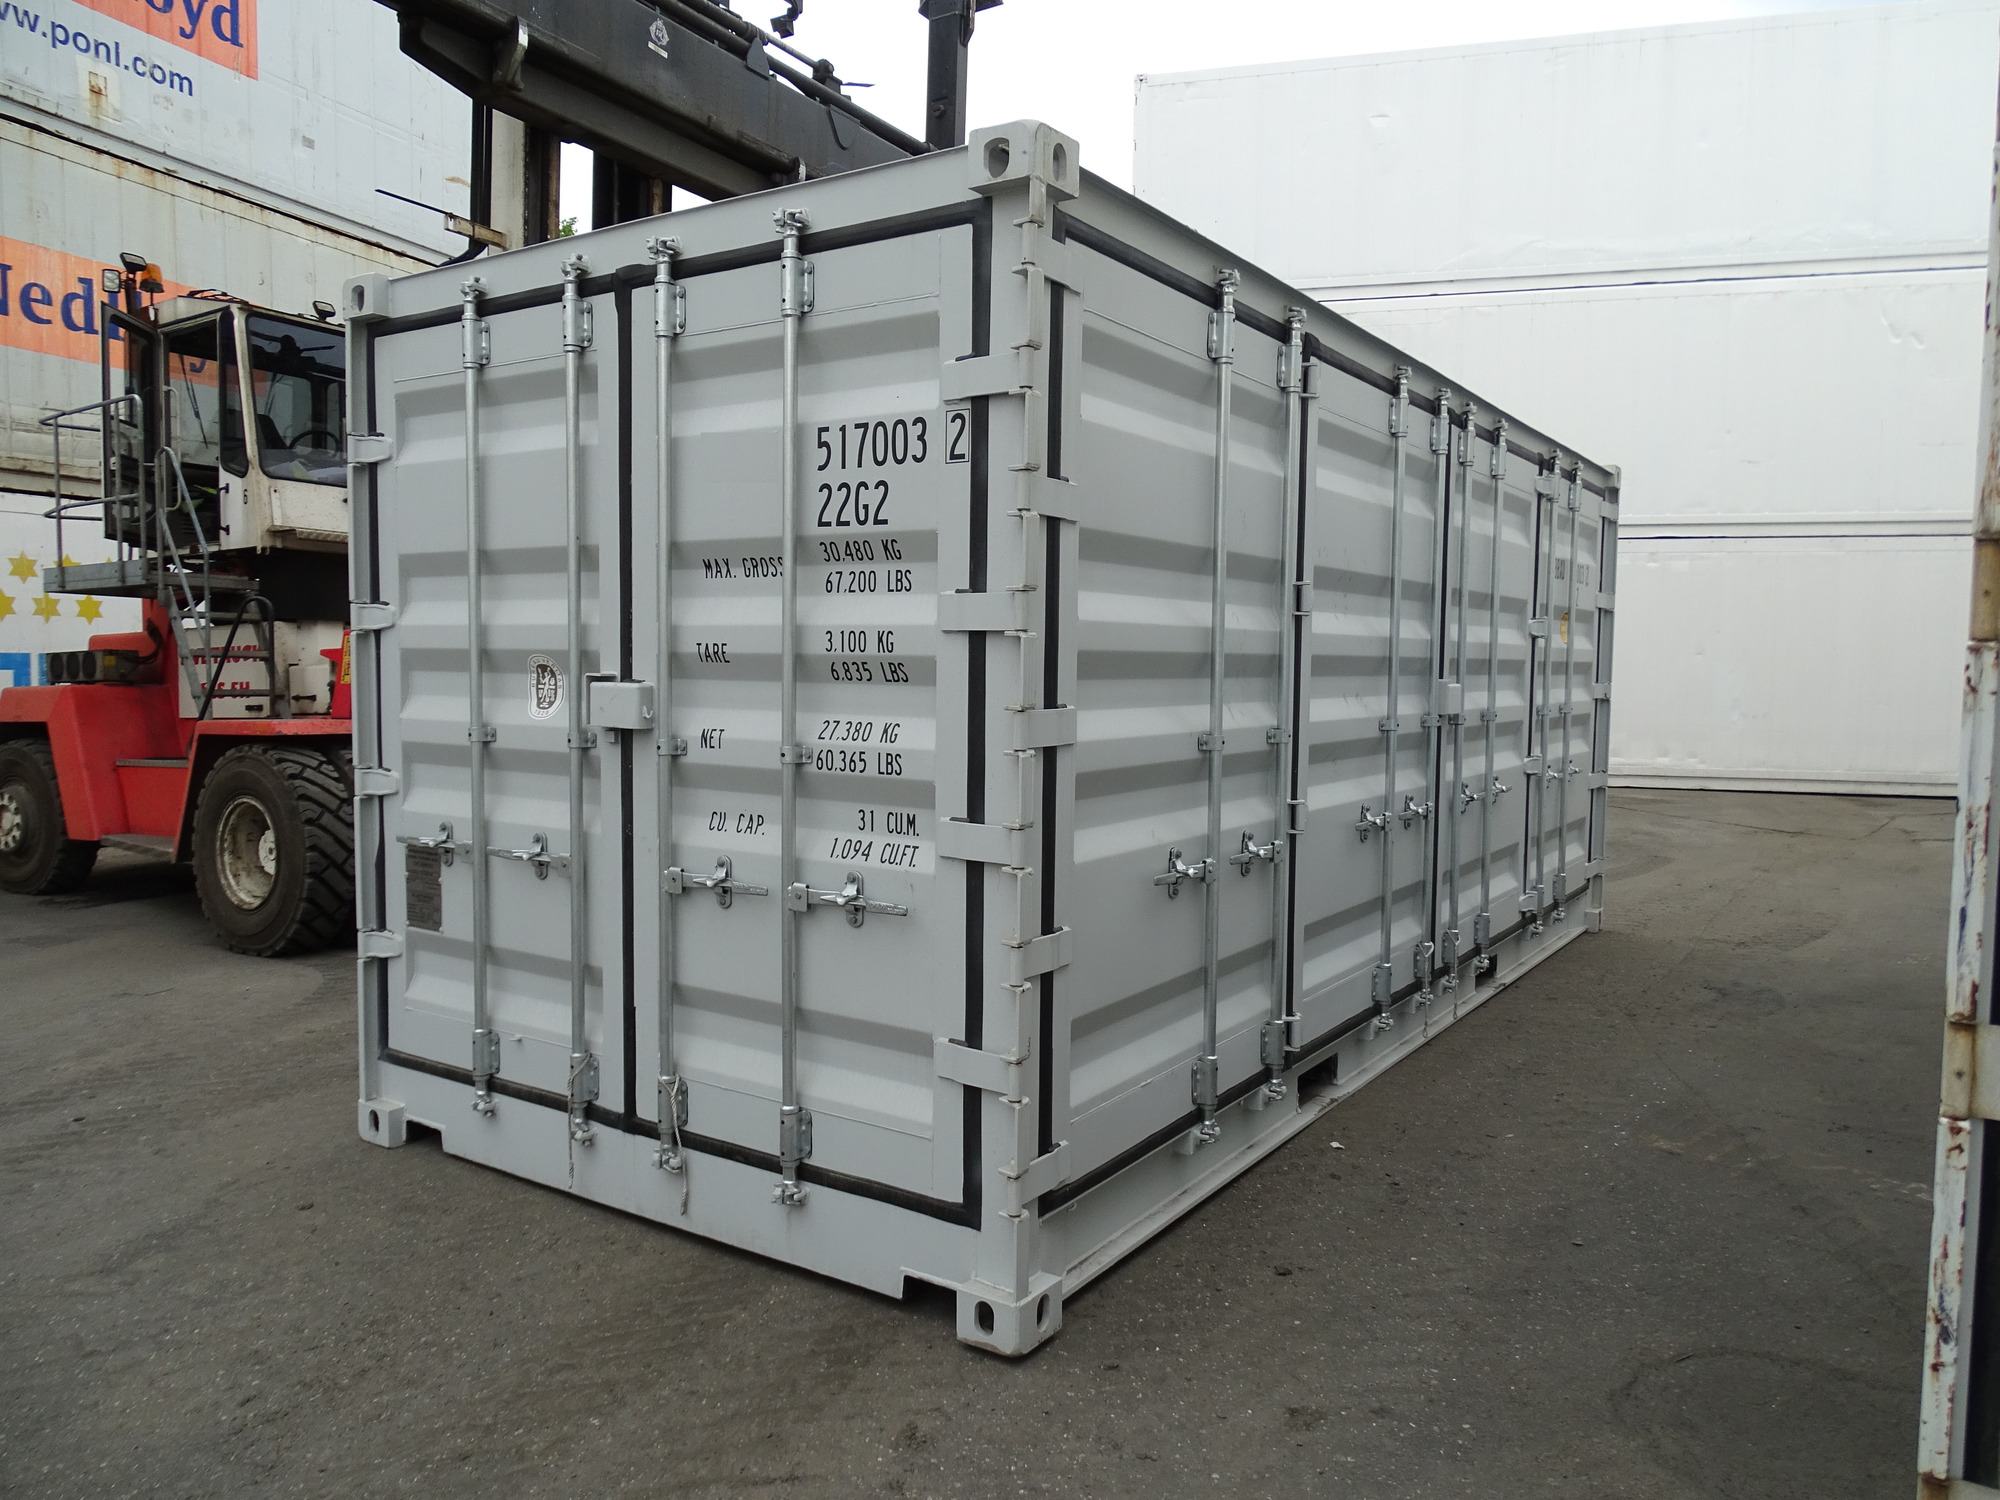 HCT Hansa Container Trading GmbH undefined: photos 7